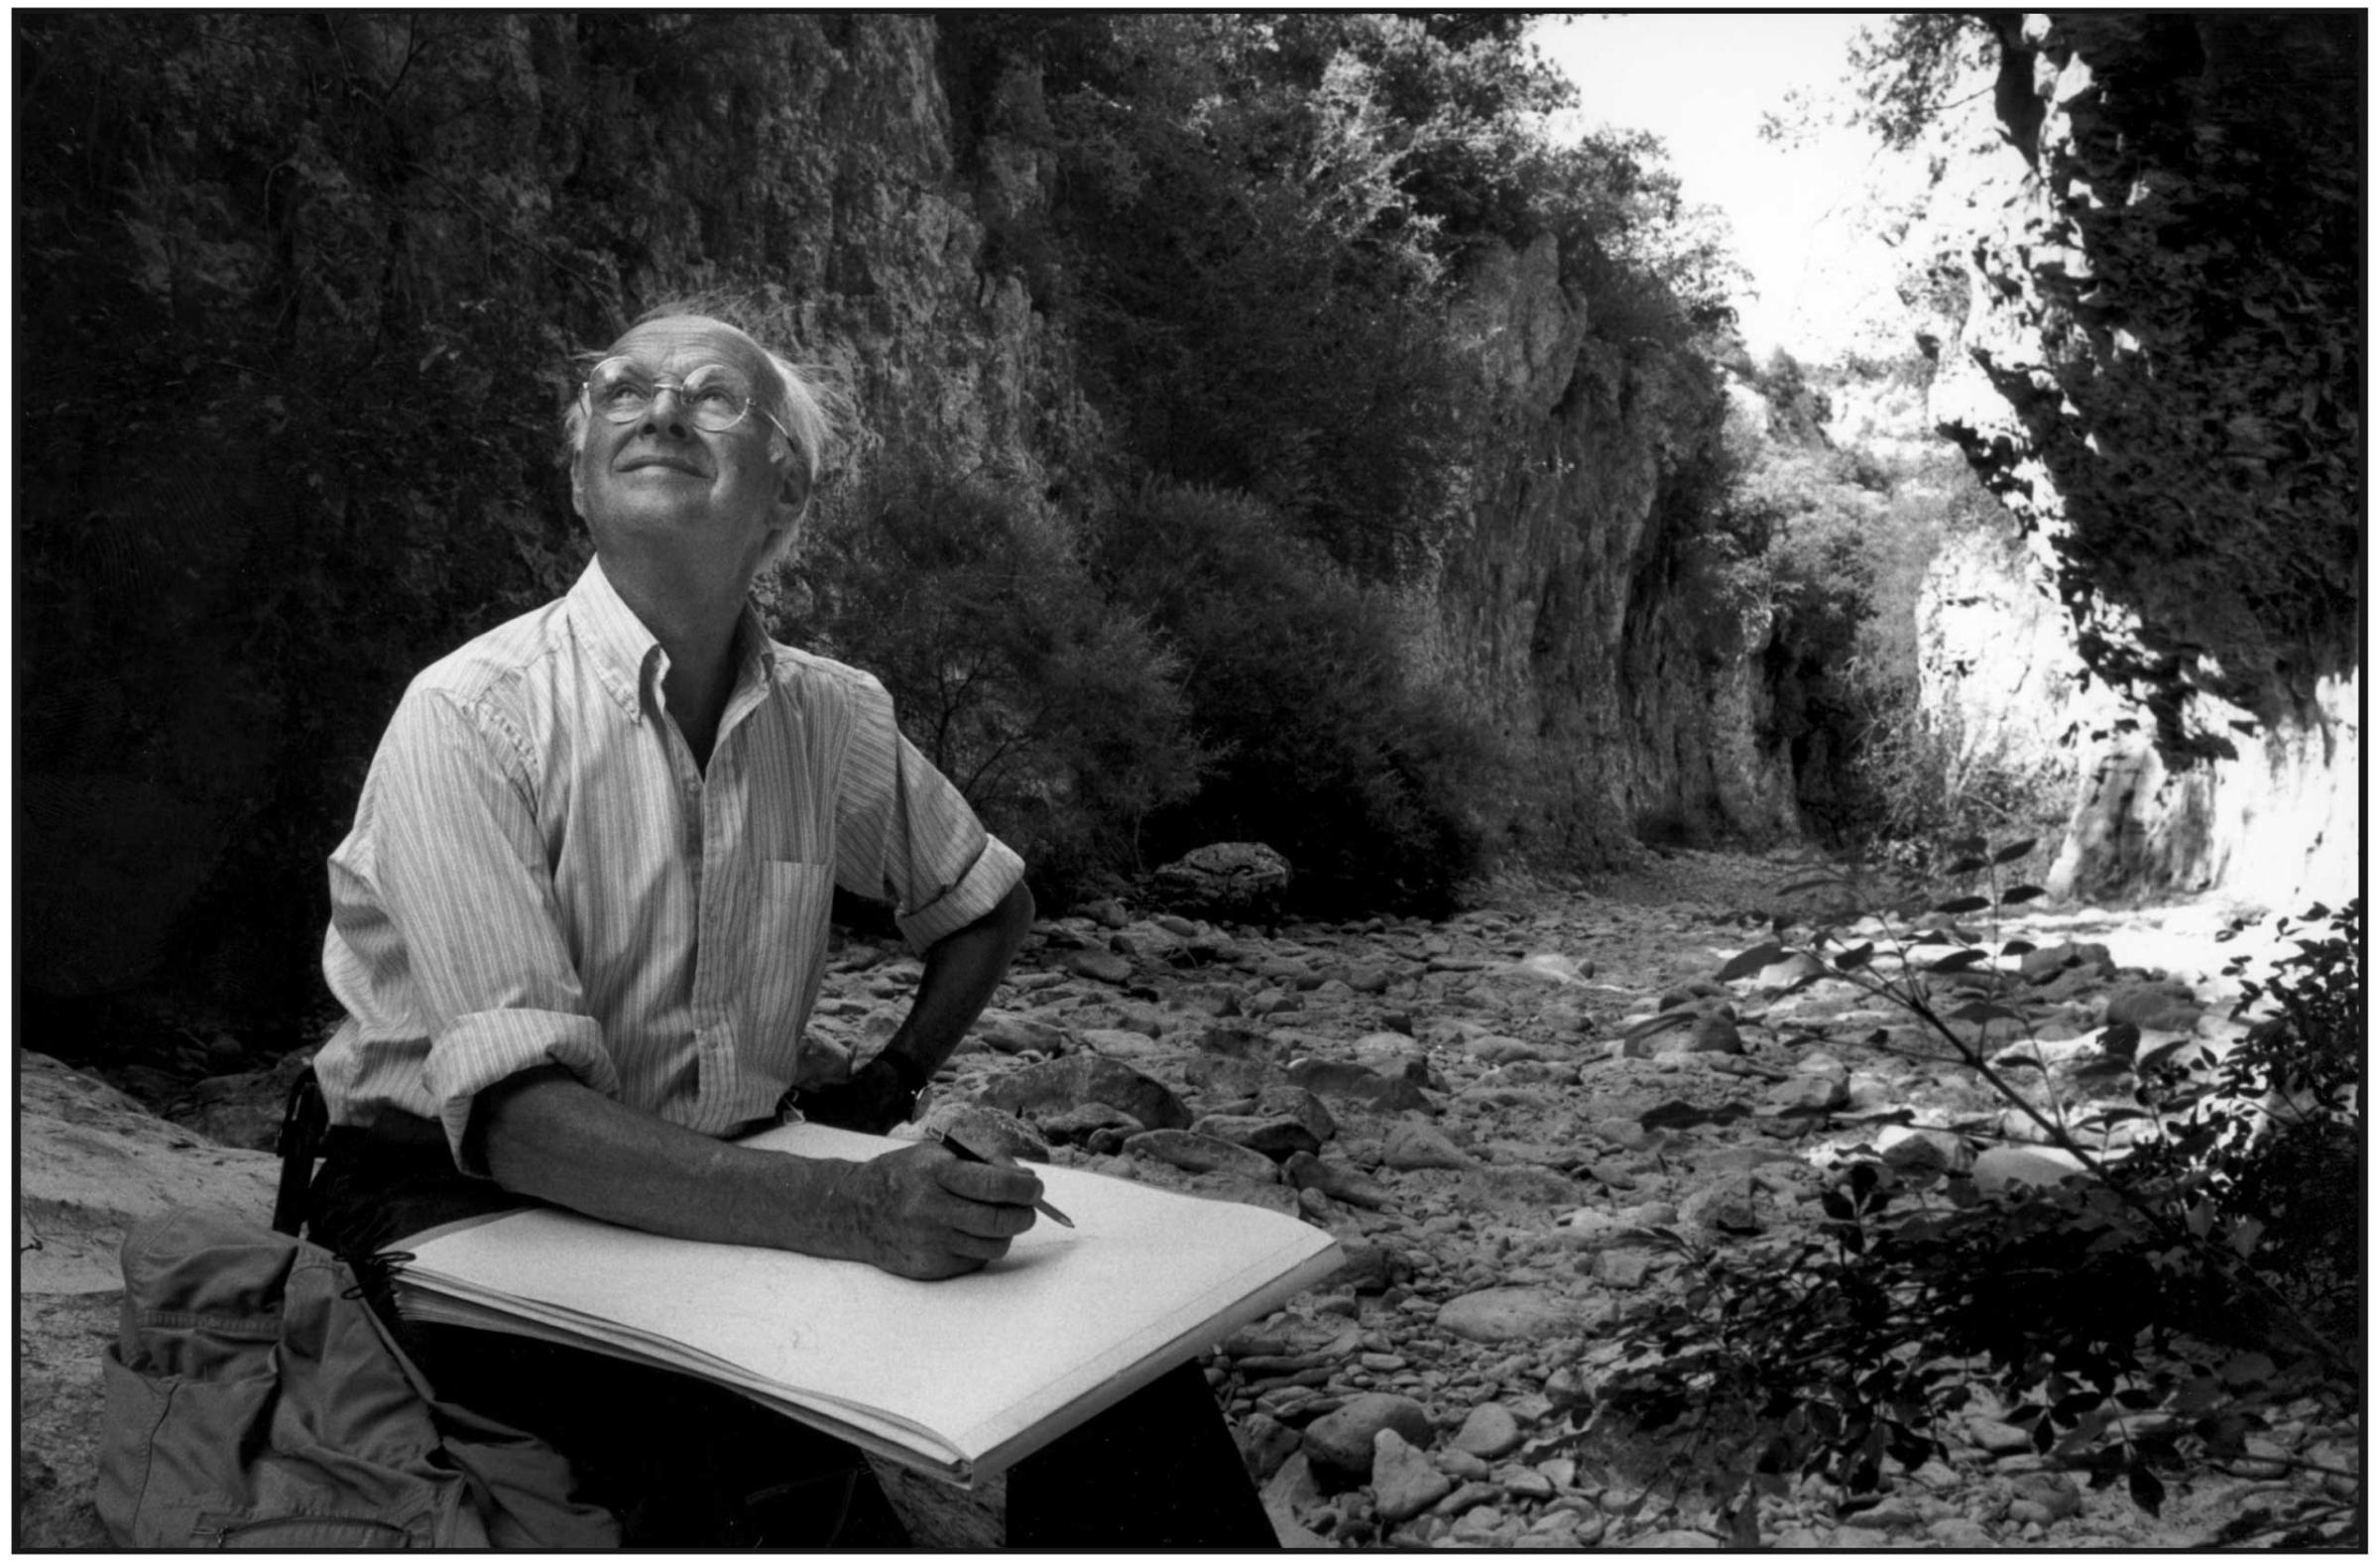 Henri Cartier-Bresson drawing in the canion of Oppedette in Alpe de Haute Provence, France, 1976.